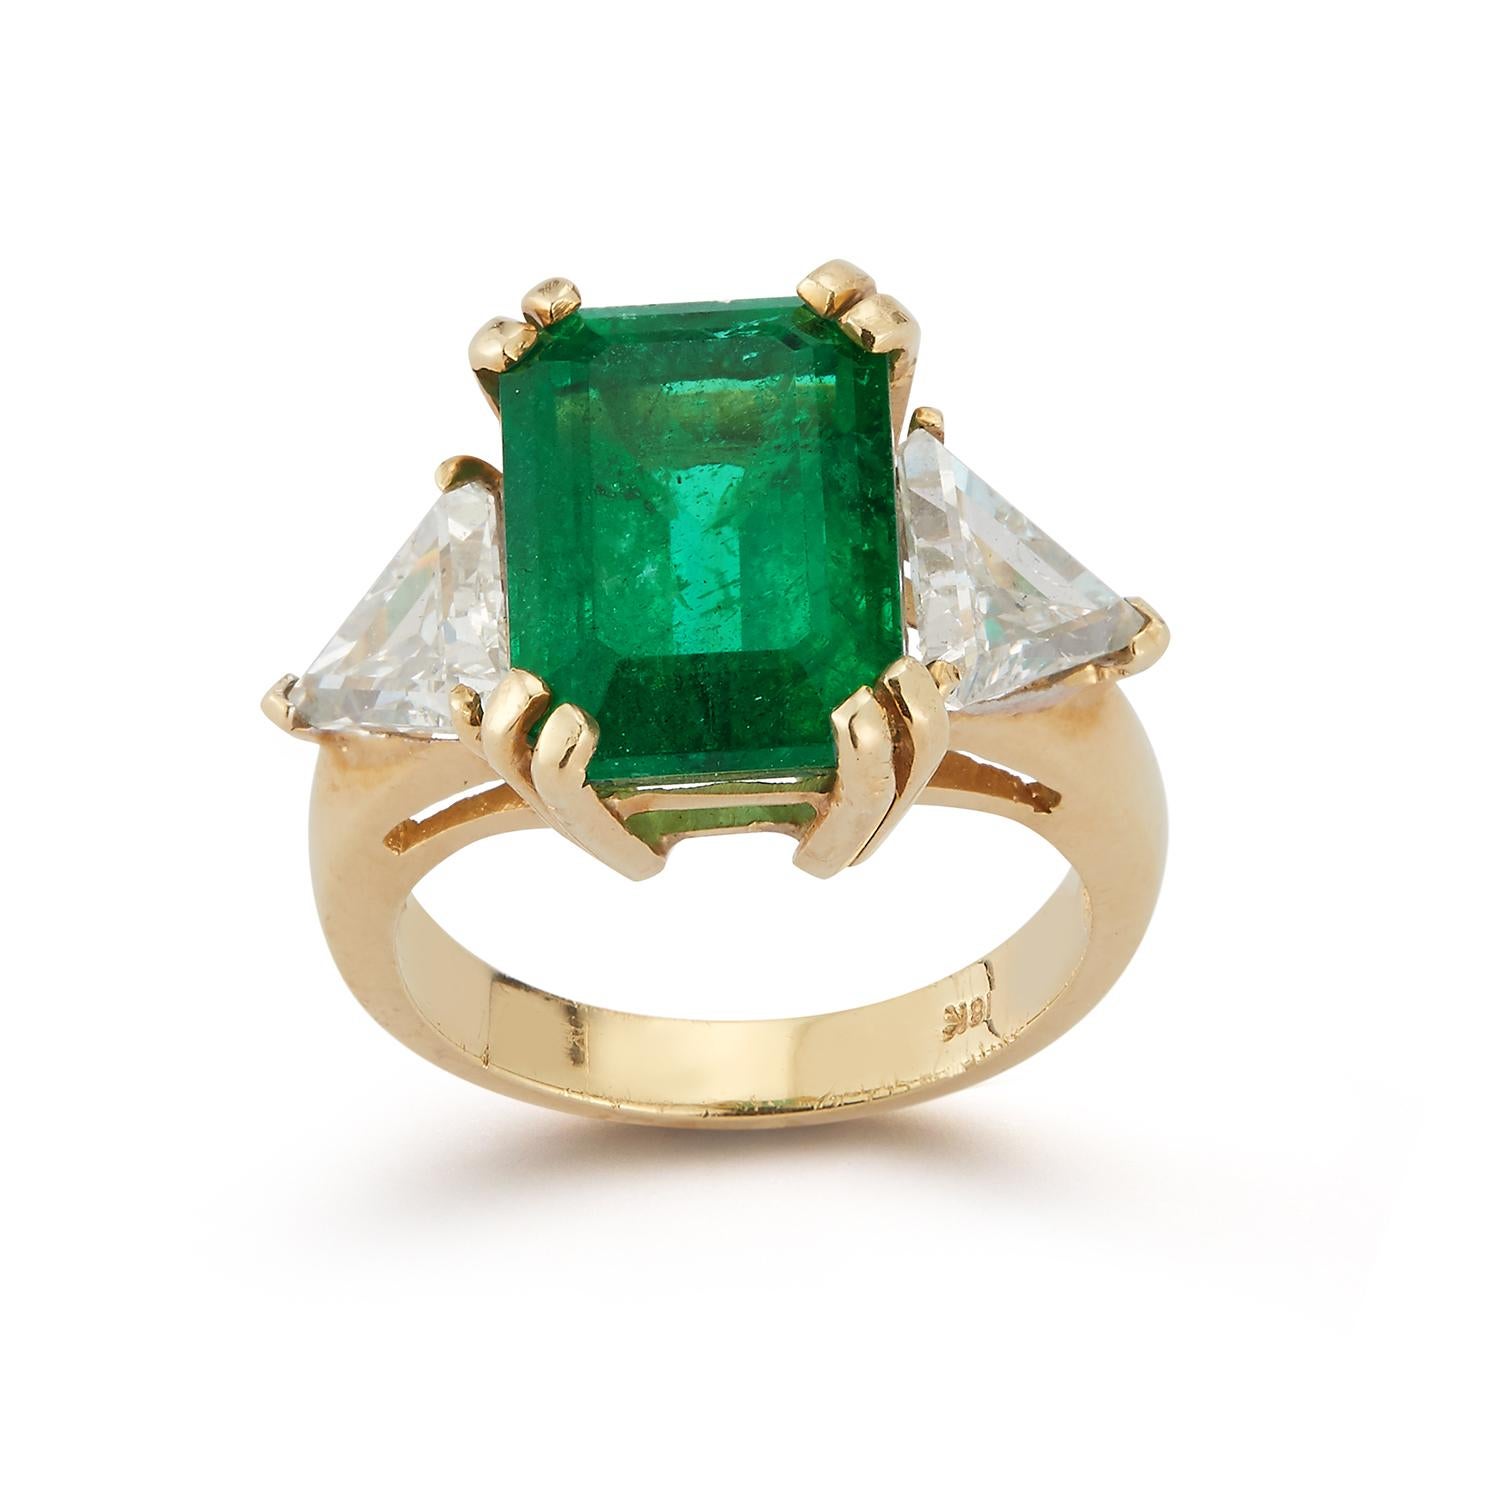 Certified Emerald & Diamond Gold Three Stone Ring set in 18k Yellow Gold
Emerald Weight: 7.48 Cts
Diamond Weight: 1.93 Cts
Ring Size: 6.25
Re-sizable free of charge 